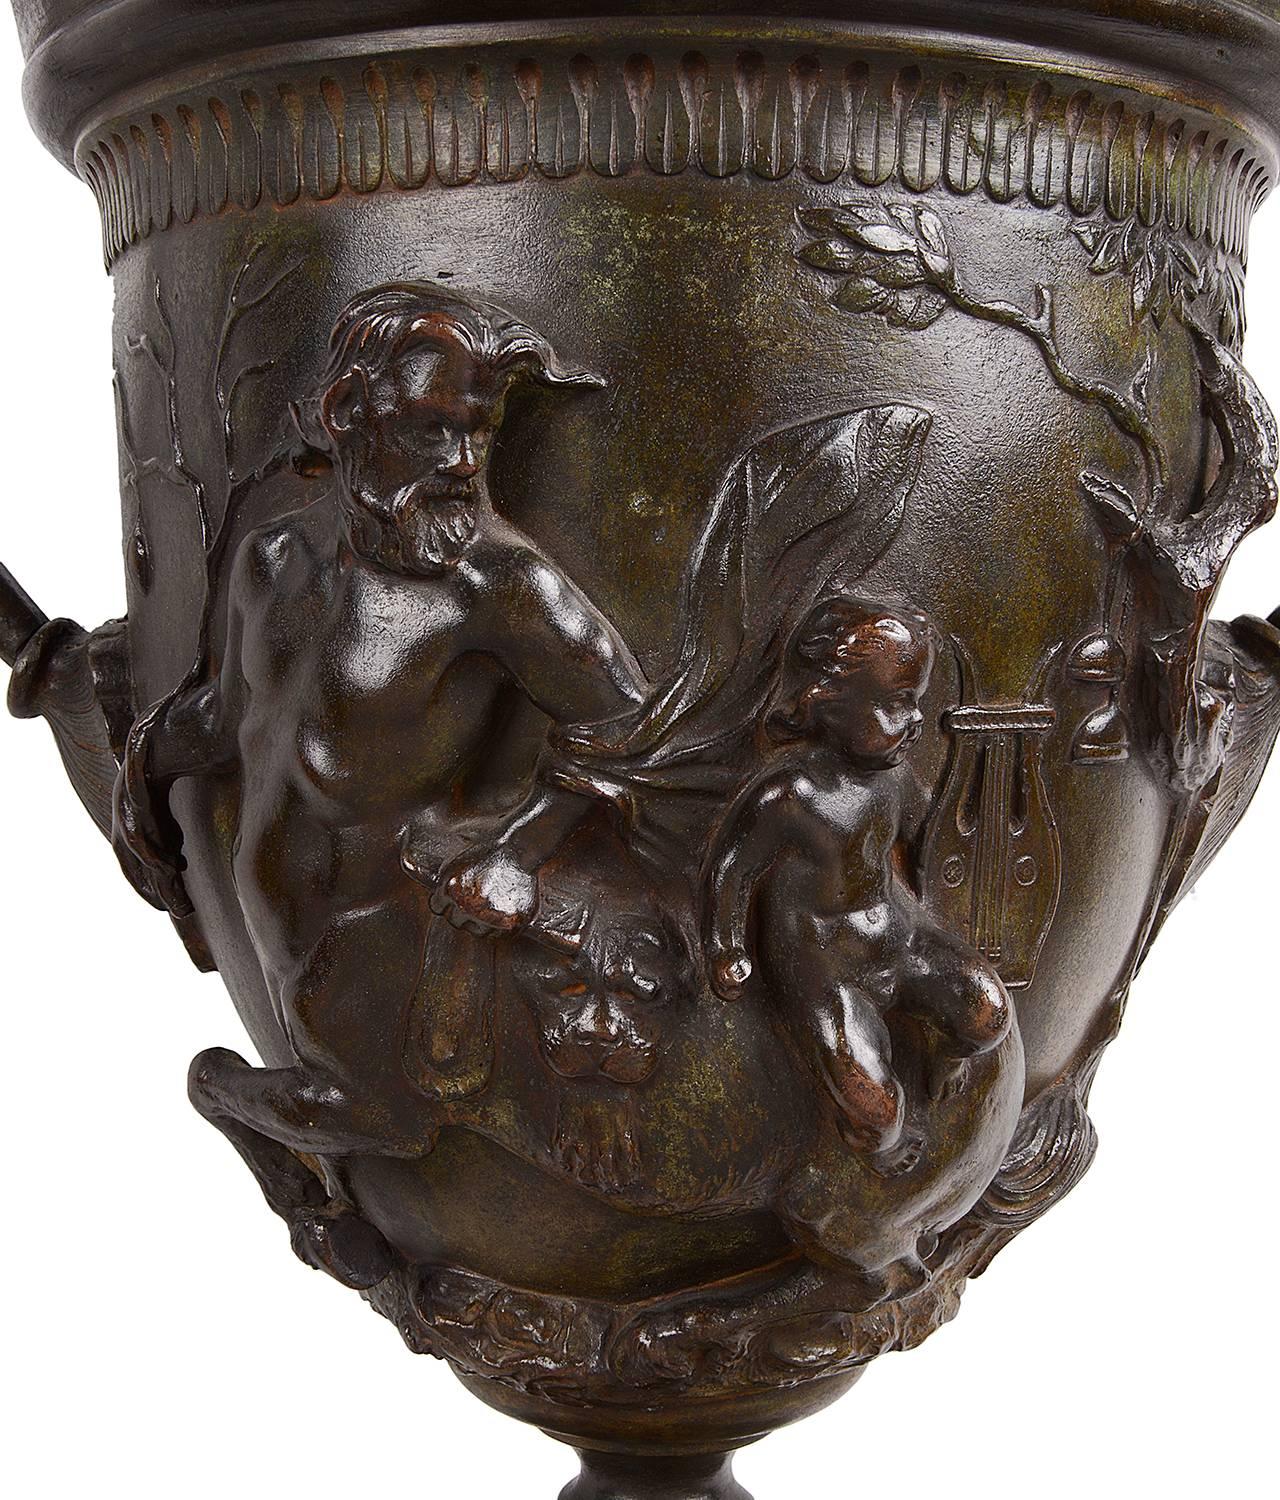 Early 19th century classical two handled bronze urn. Depicting mythical god like figures with cherubs.

This very nice Kantharos with mythology on it, is a 19th century replica of one of the 14 silver Kantharosses found in Pompeii in 1835 during